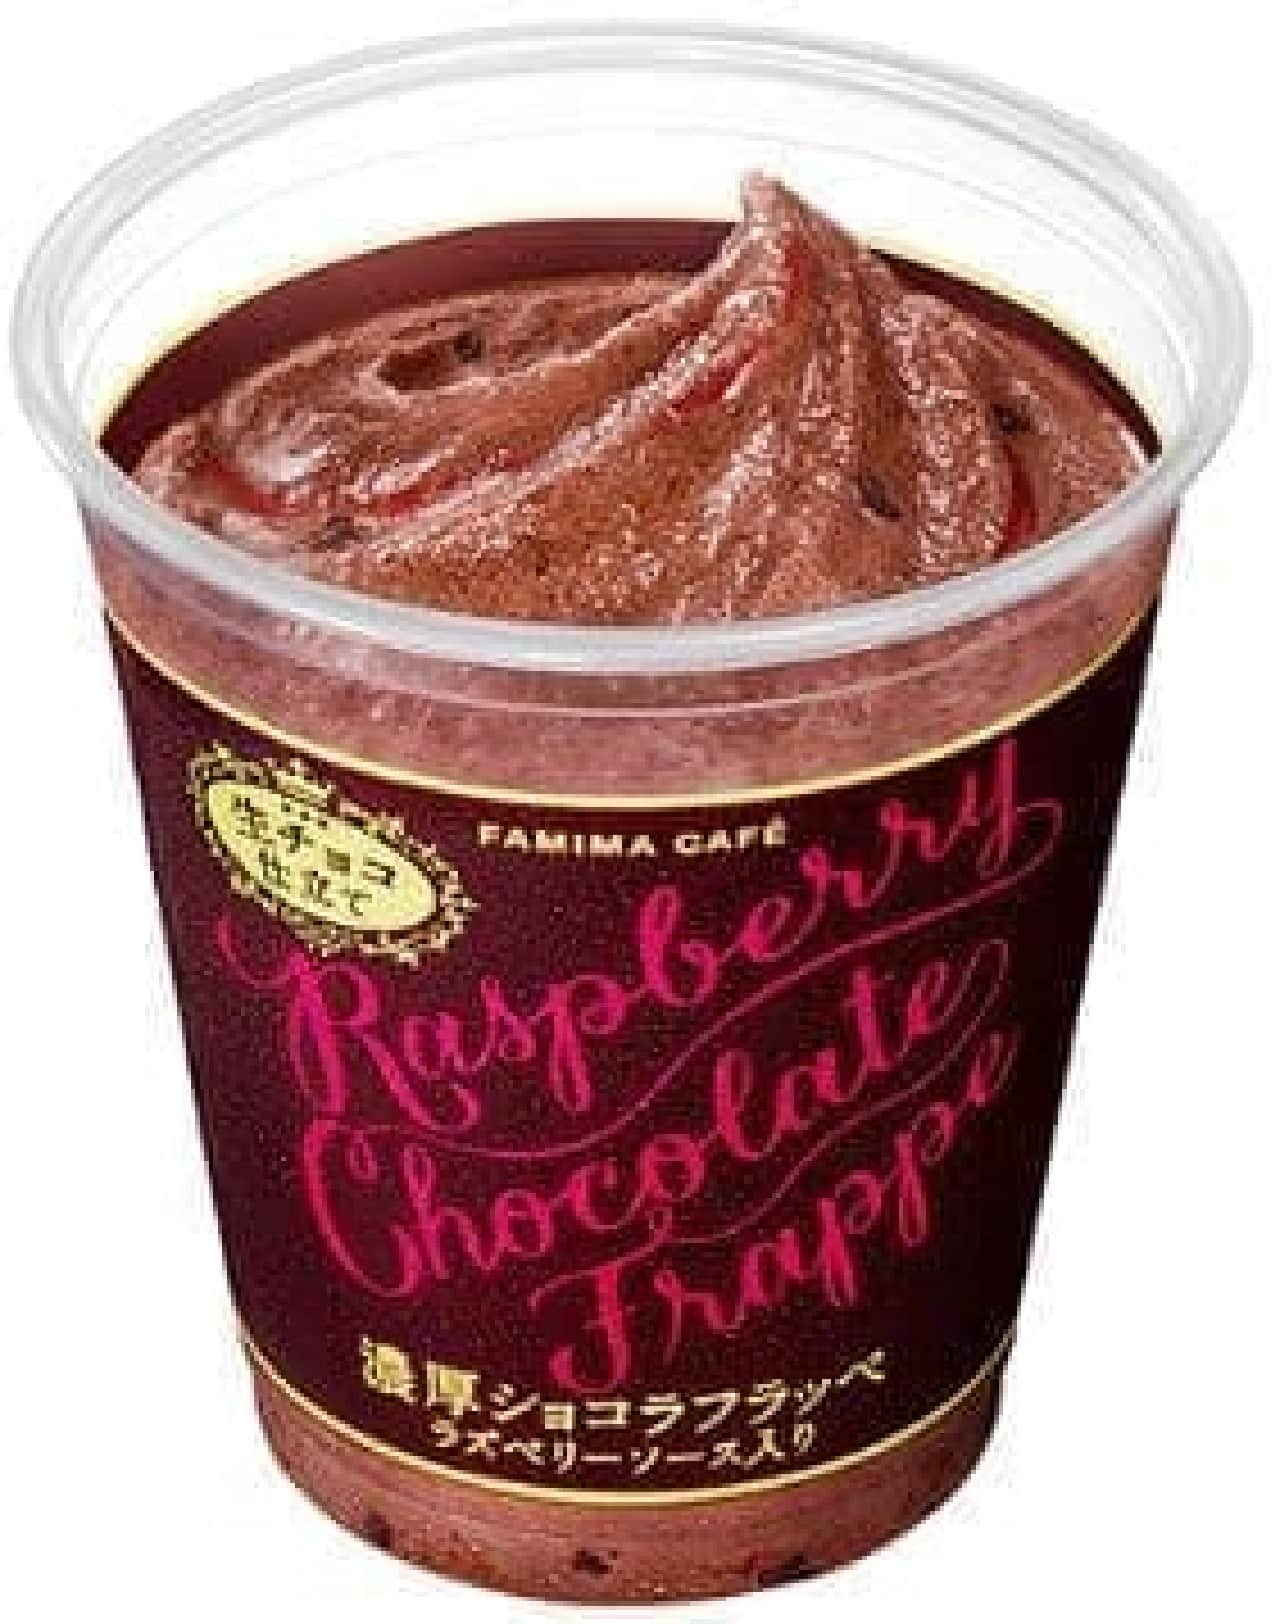 FamilyMart "Rich chocolate frappe with raw chocolate (with raspberry sauce)"